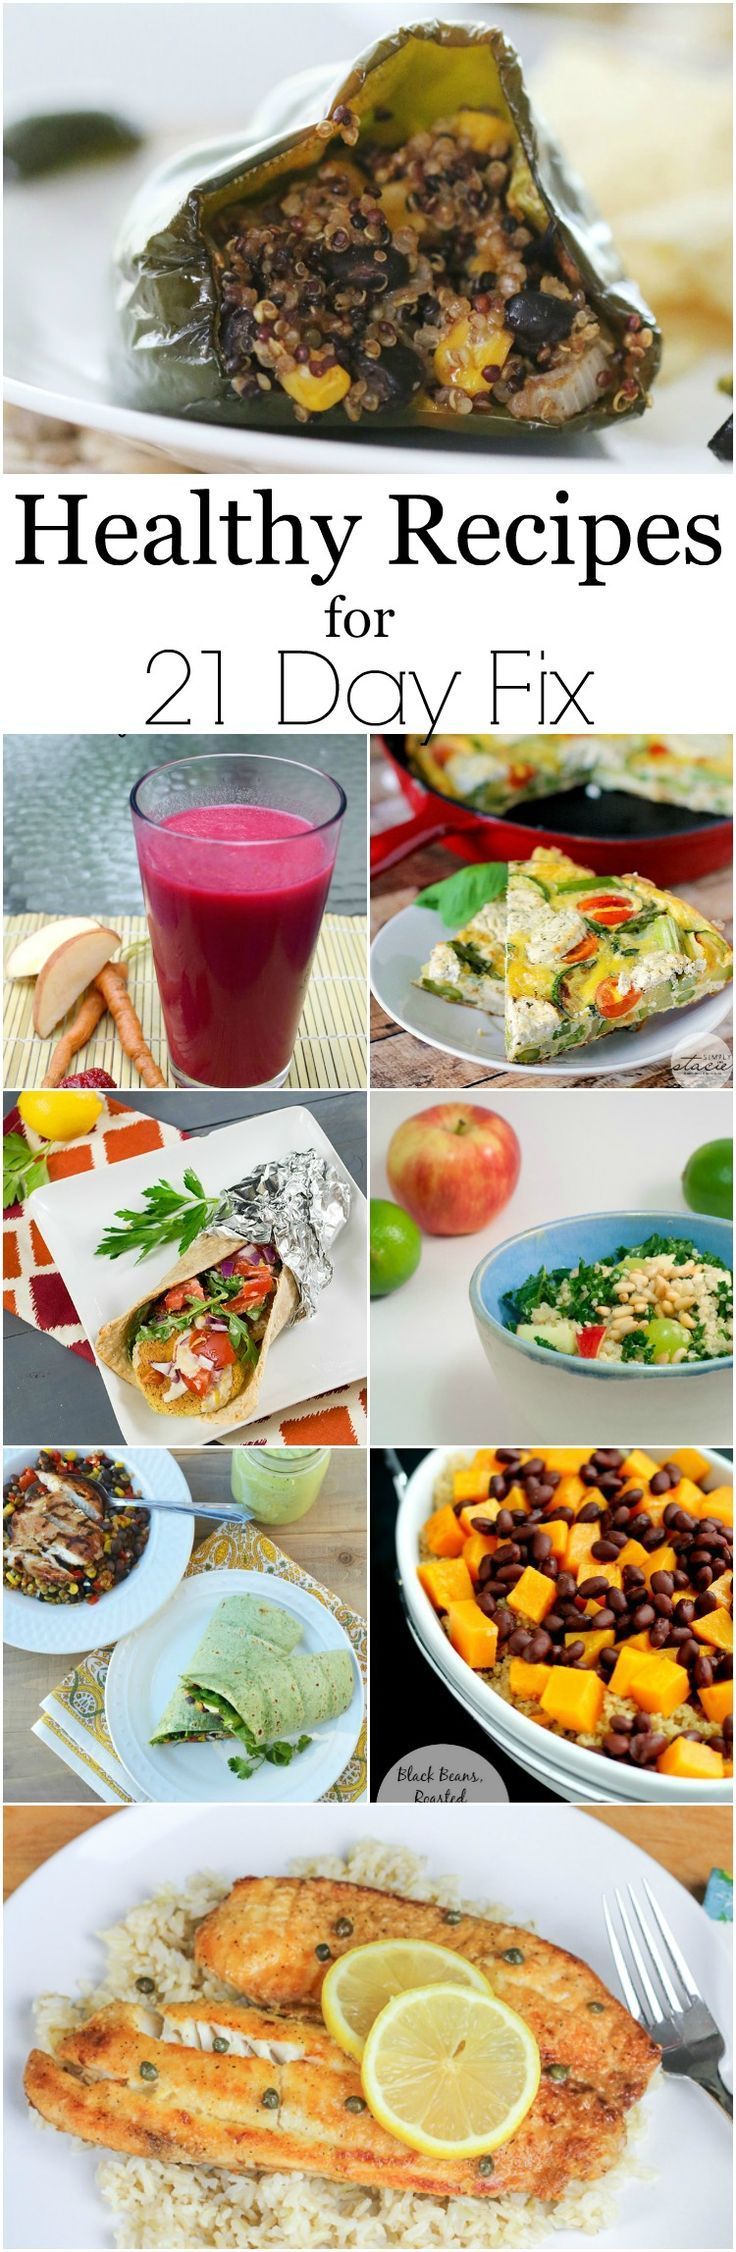 21 Day Fix Recipes Lunch